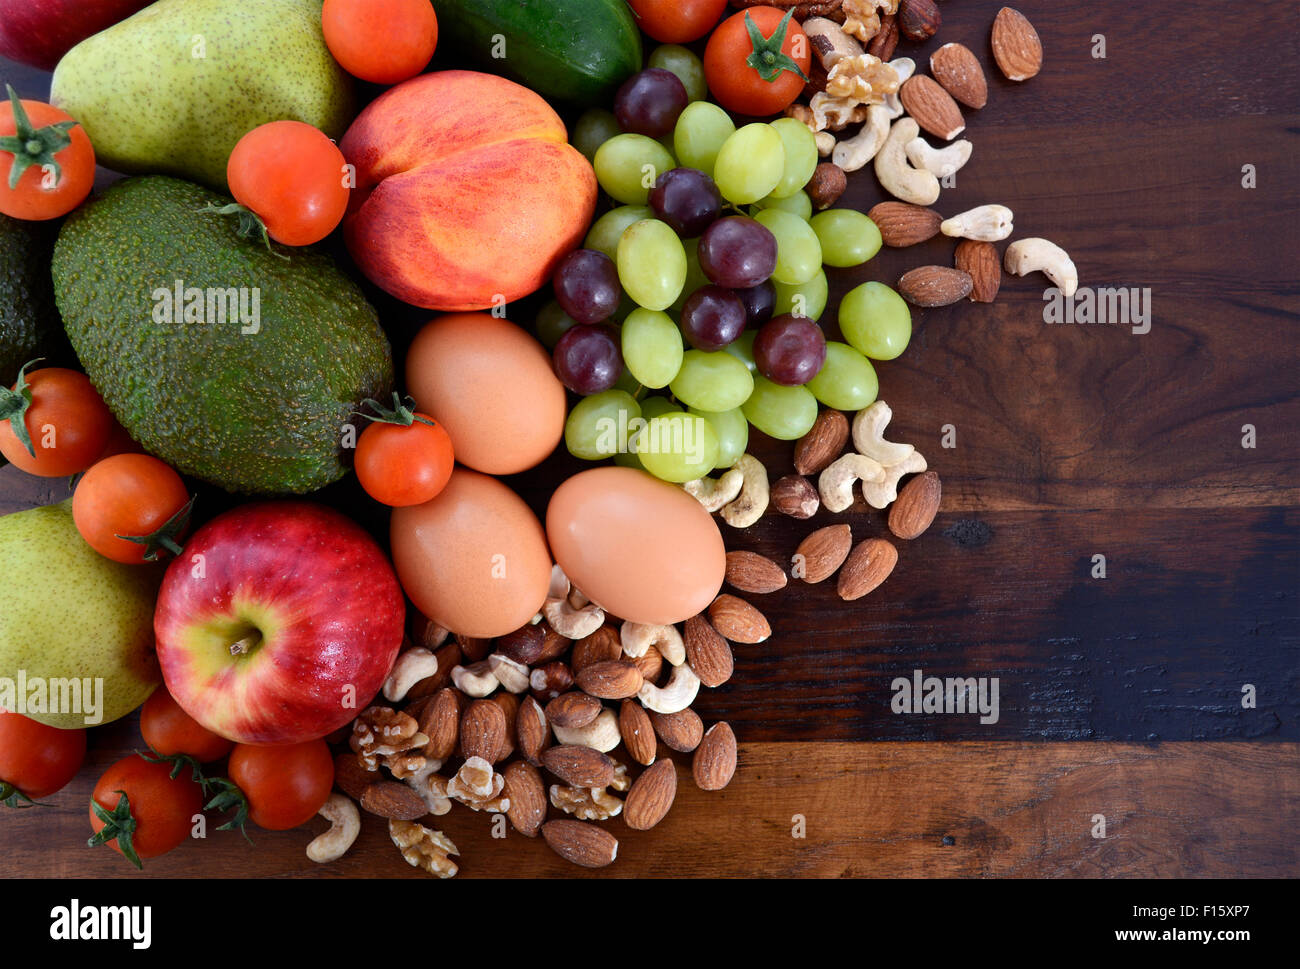 Healthy Diet with fresh fruit, apples, pears, avocados, grapes, eggs, nuts, tomatoes cucumbers on a rustic wood background. Stock Photo